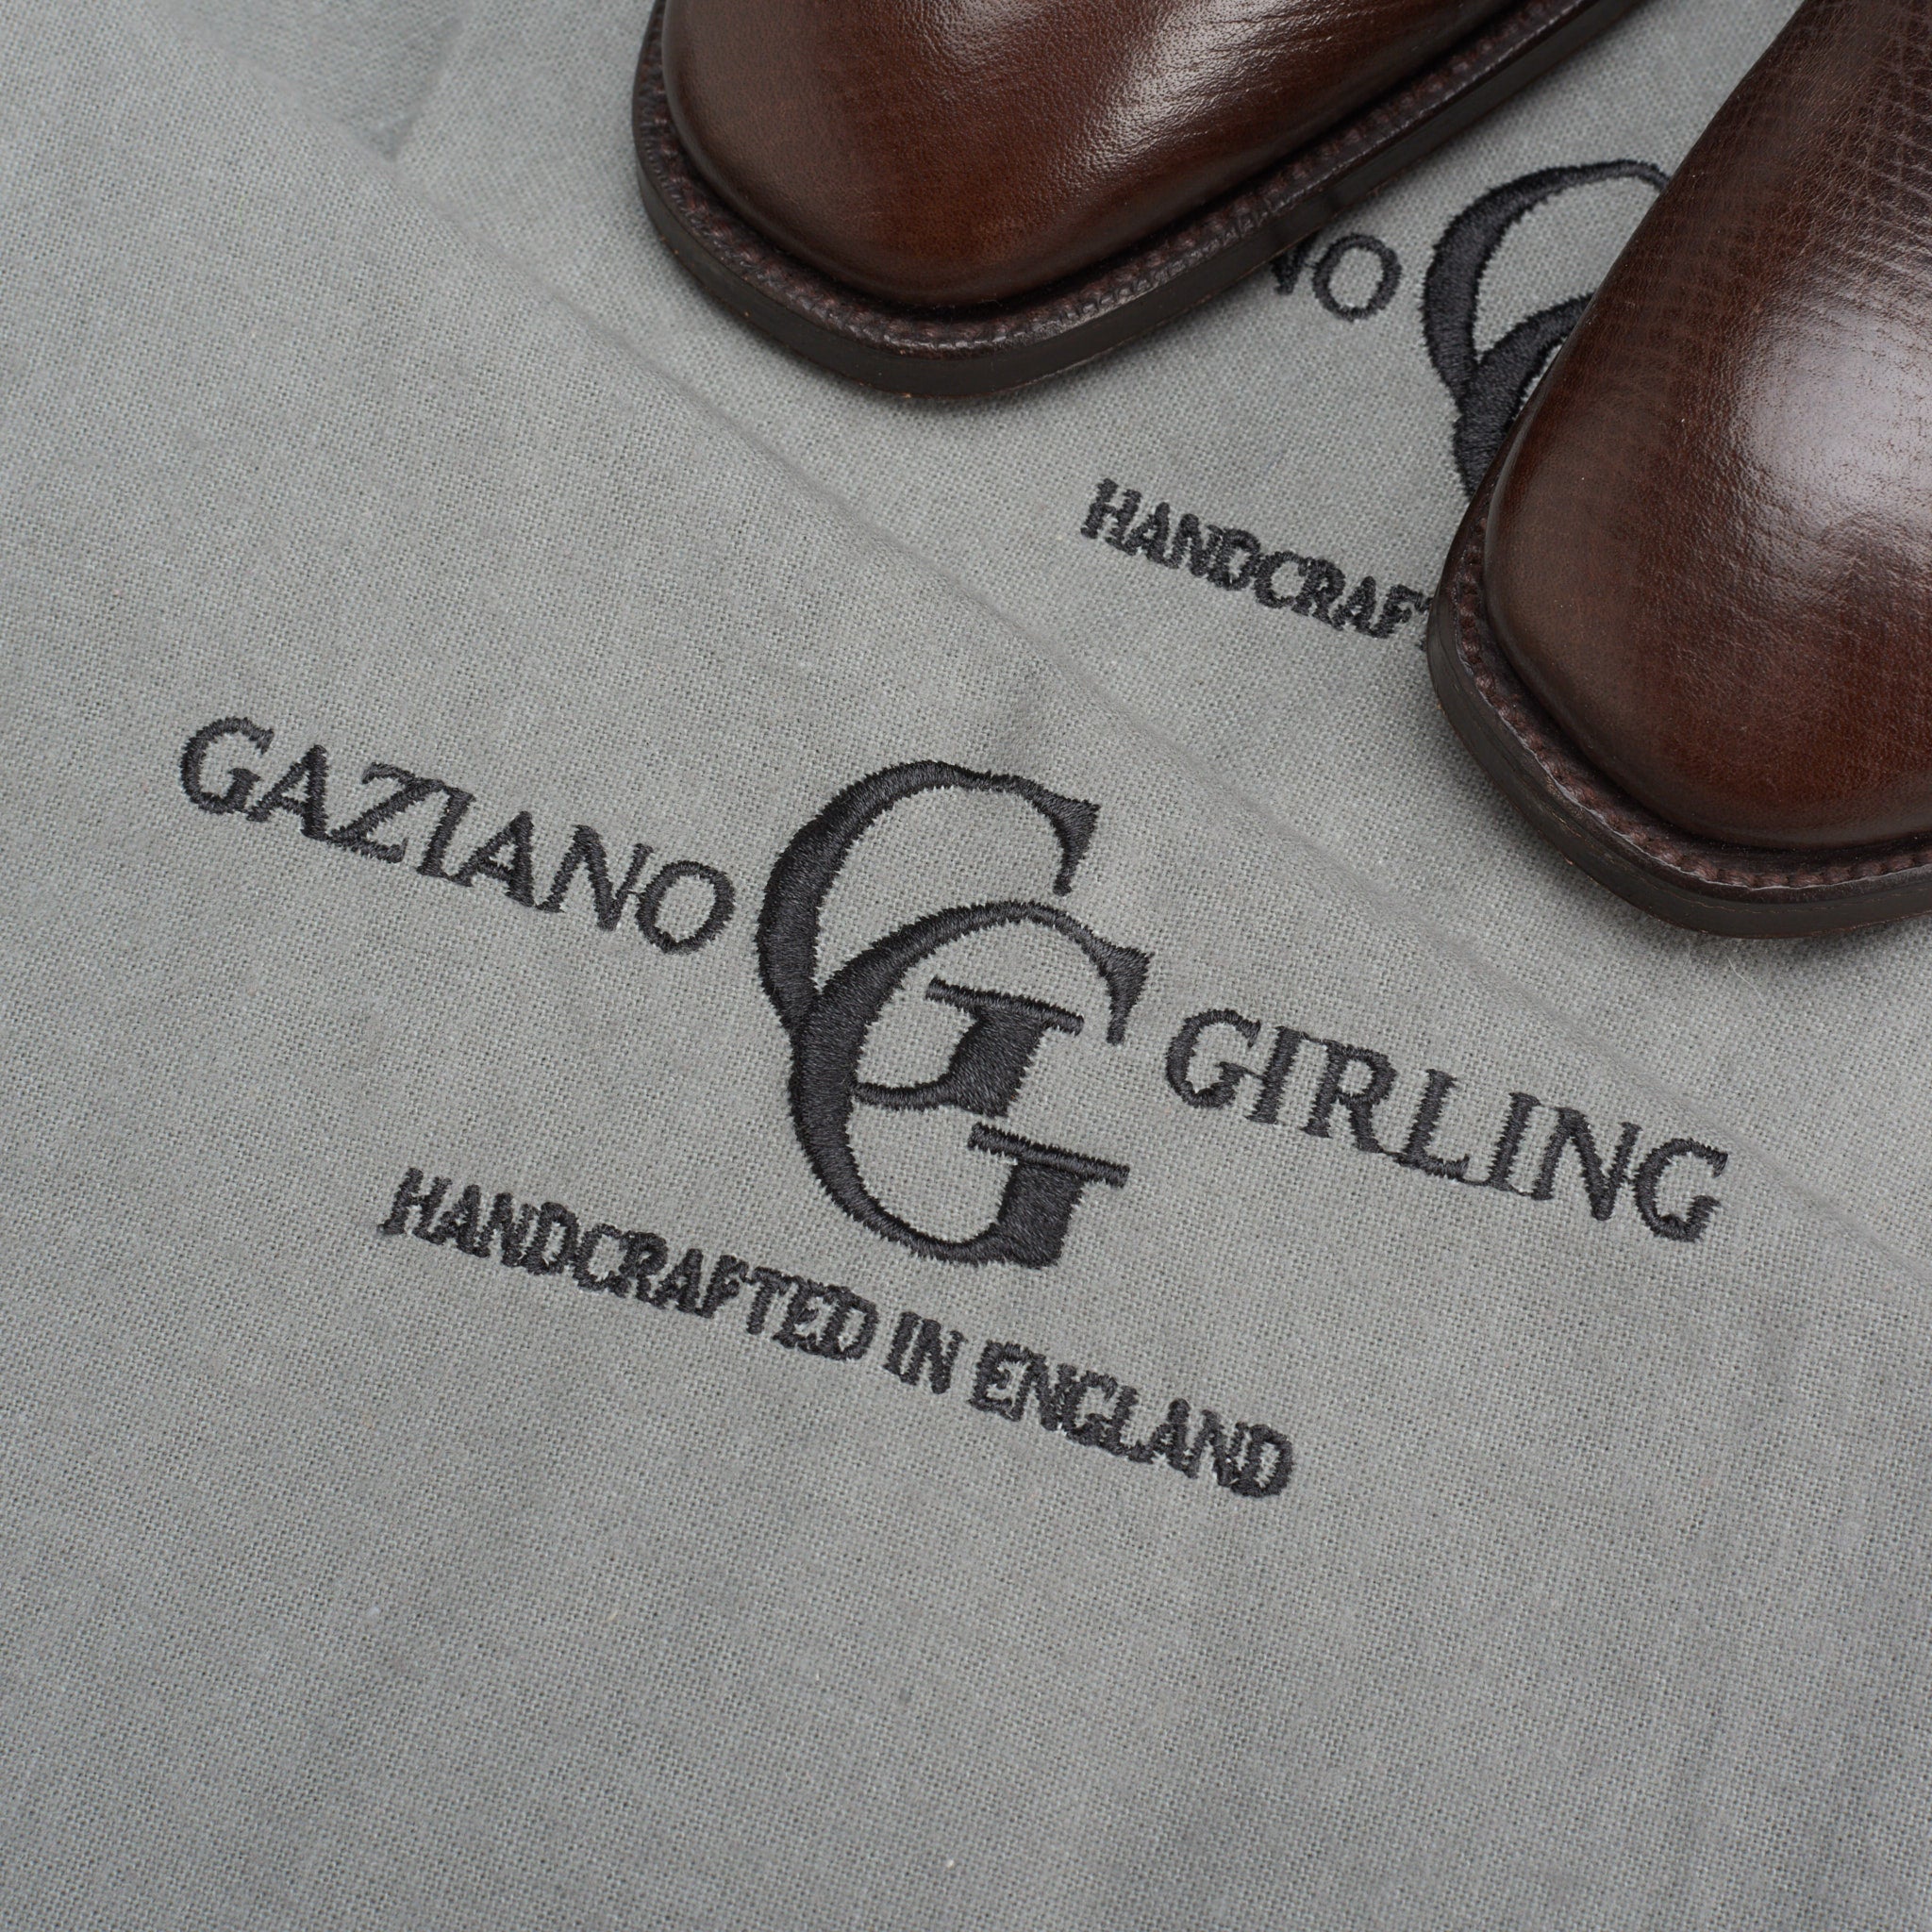 GAZIANO & GIRLING "Wilde" Brown Derby Dress Shoes UK 8E NEW US 8.5 Last MH71 GAZIANO & GIRLING